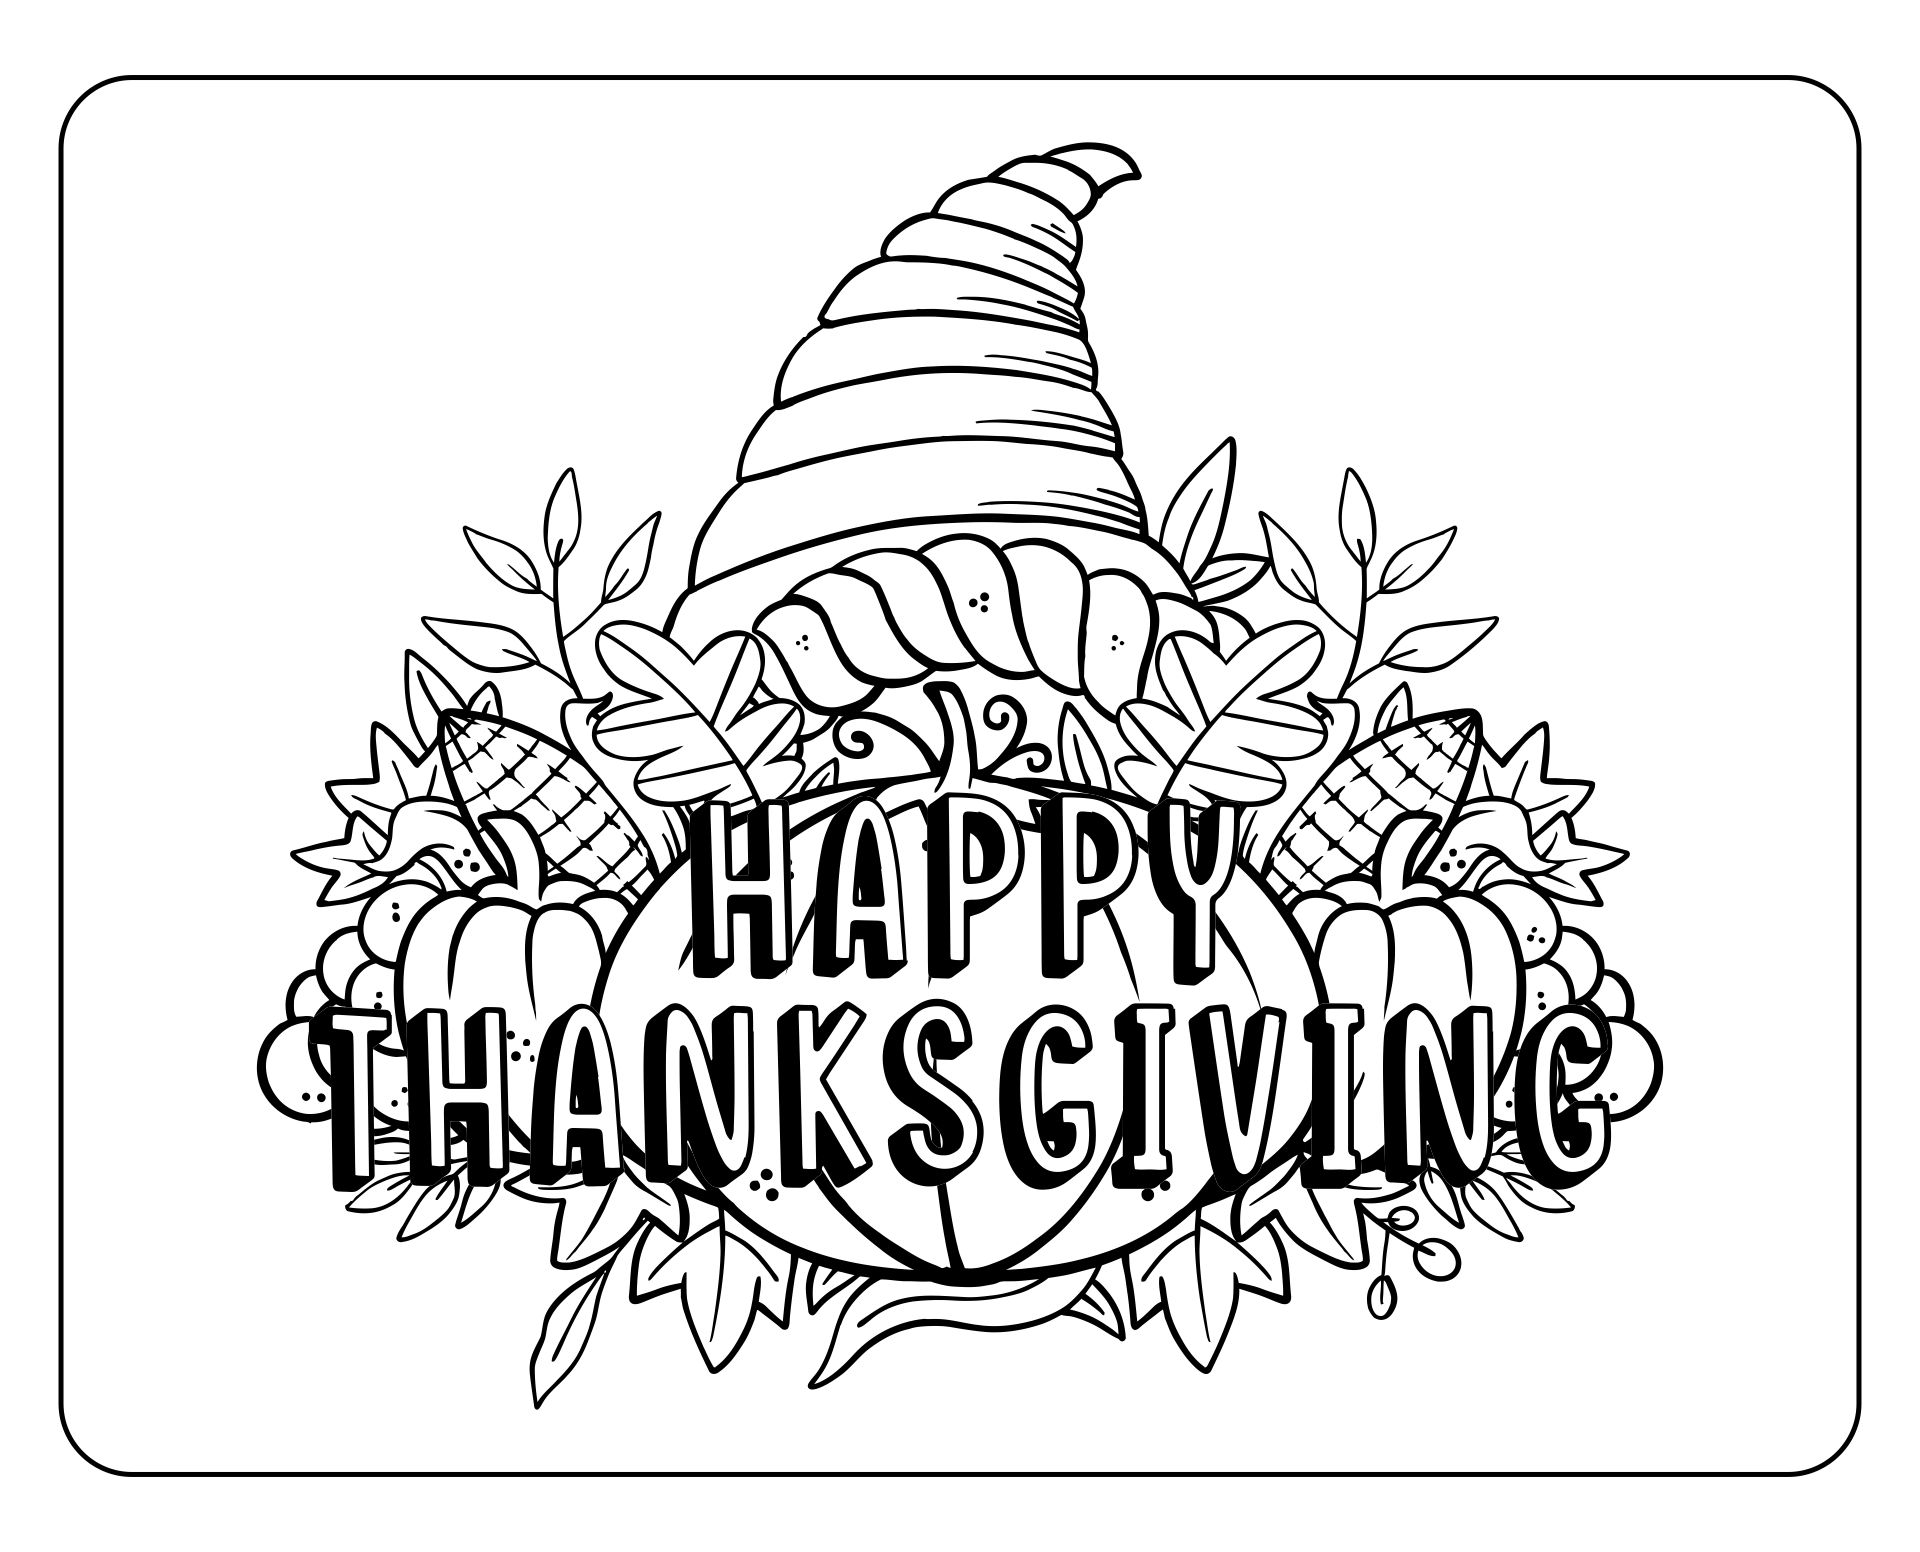 Festive & Fun Thanksgiving Coloring Pages And Placemats For Kids